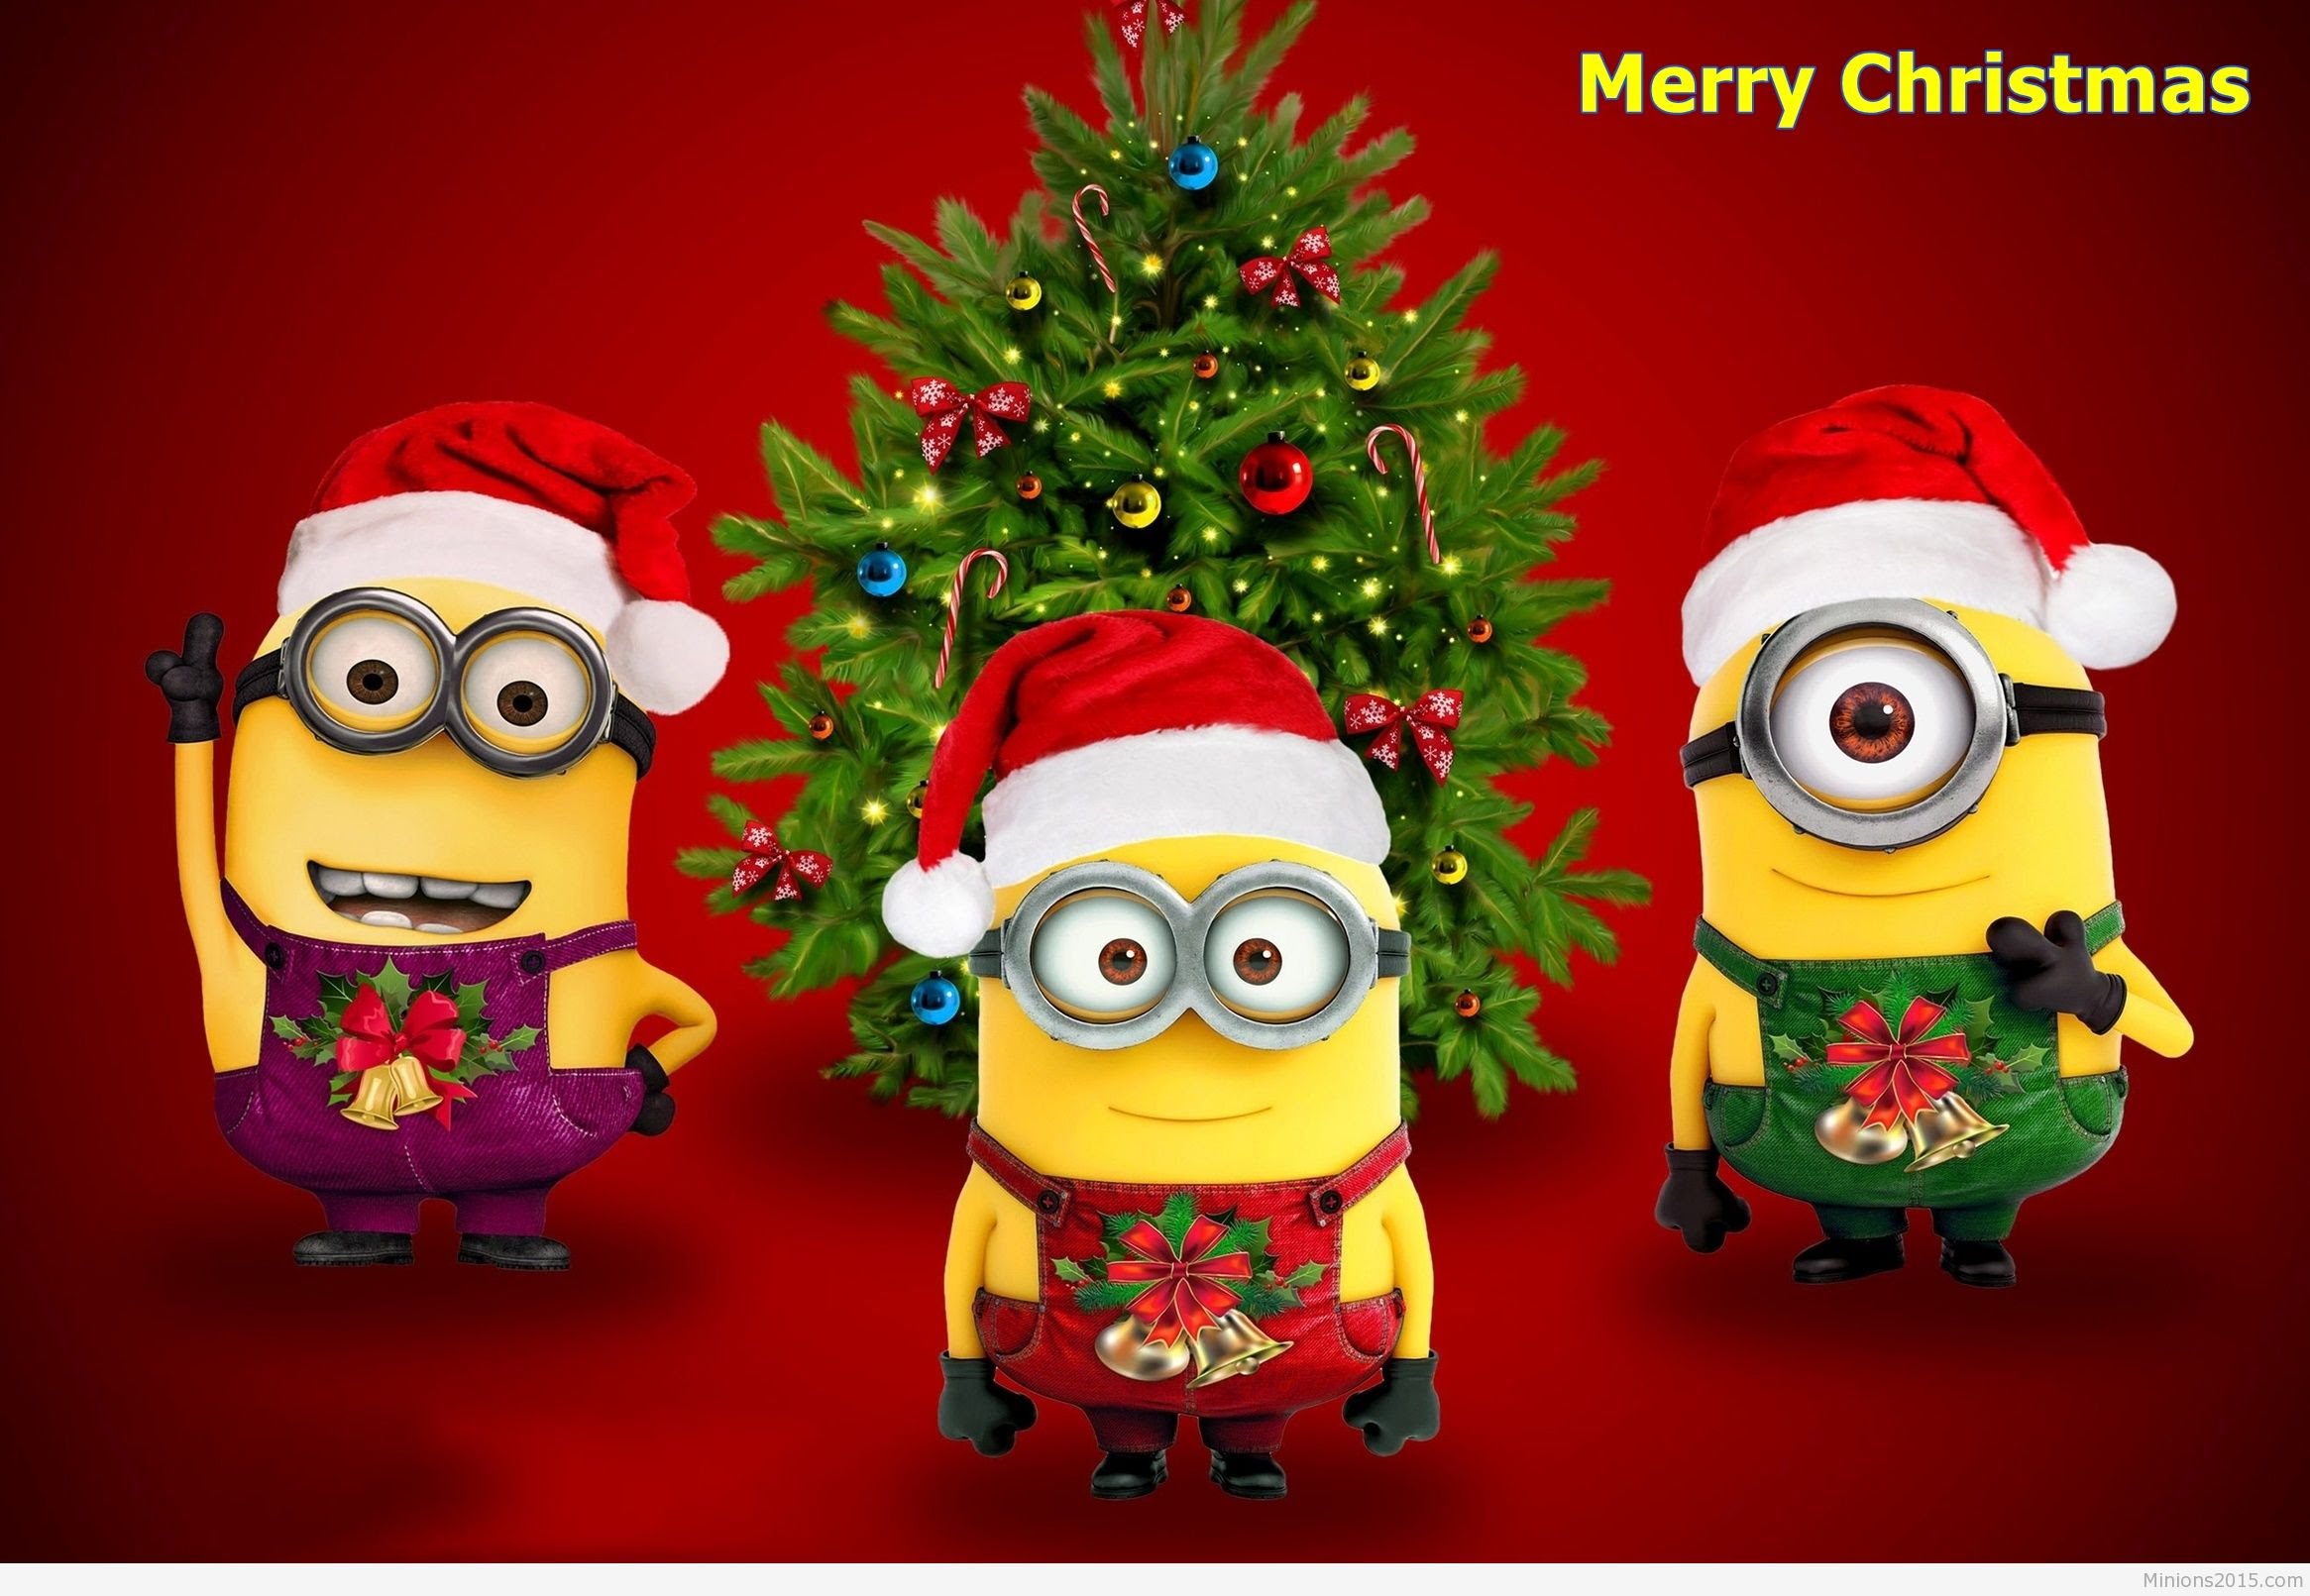 Best Christmas Song 2016 - Merry Christmas Remix - Minions Version ...